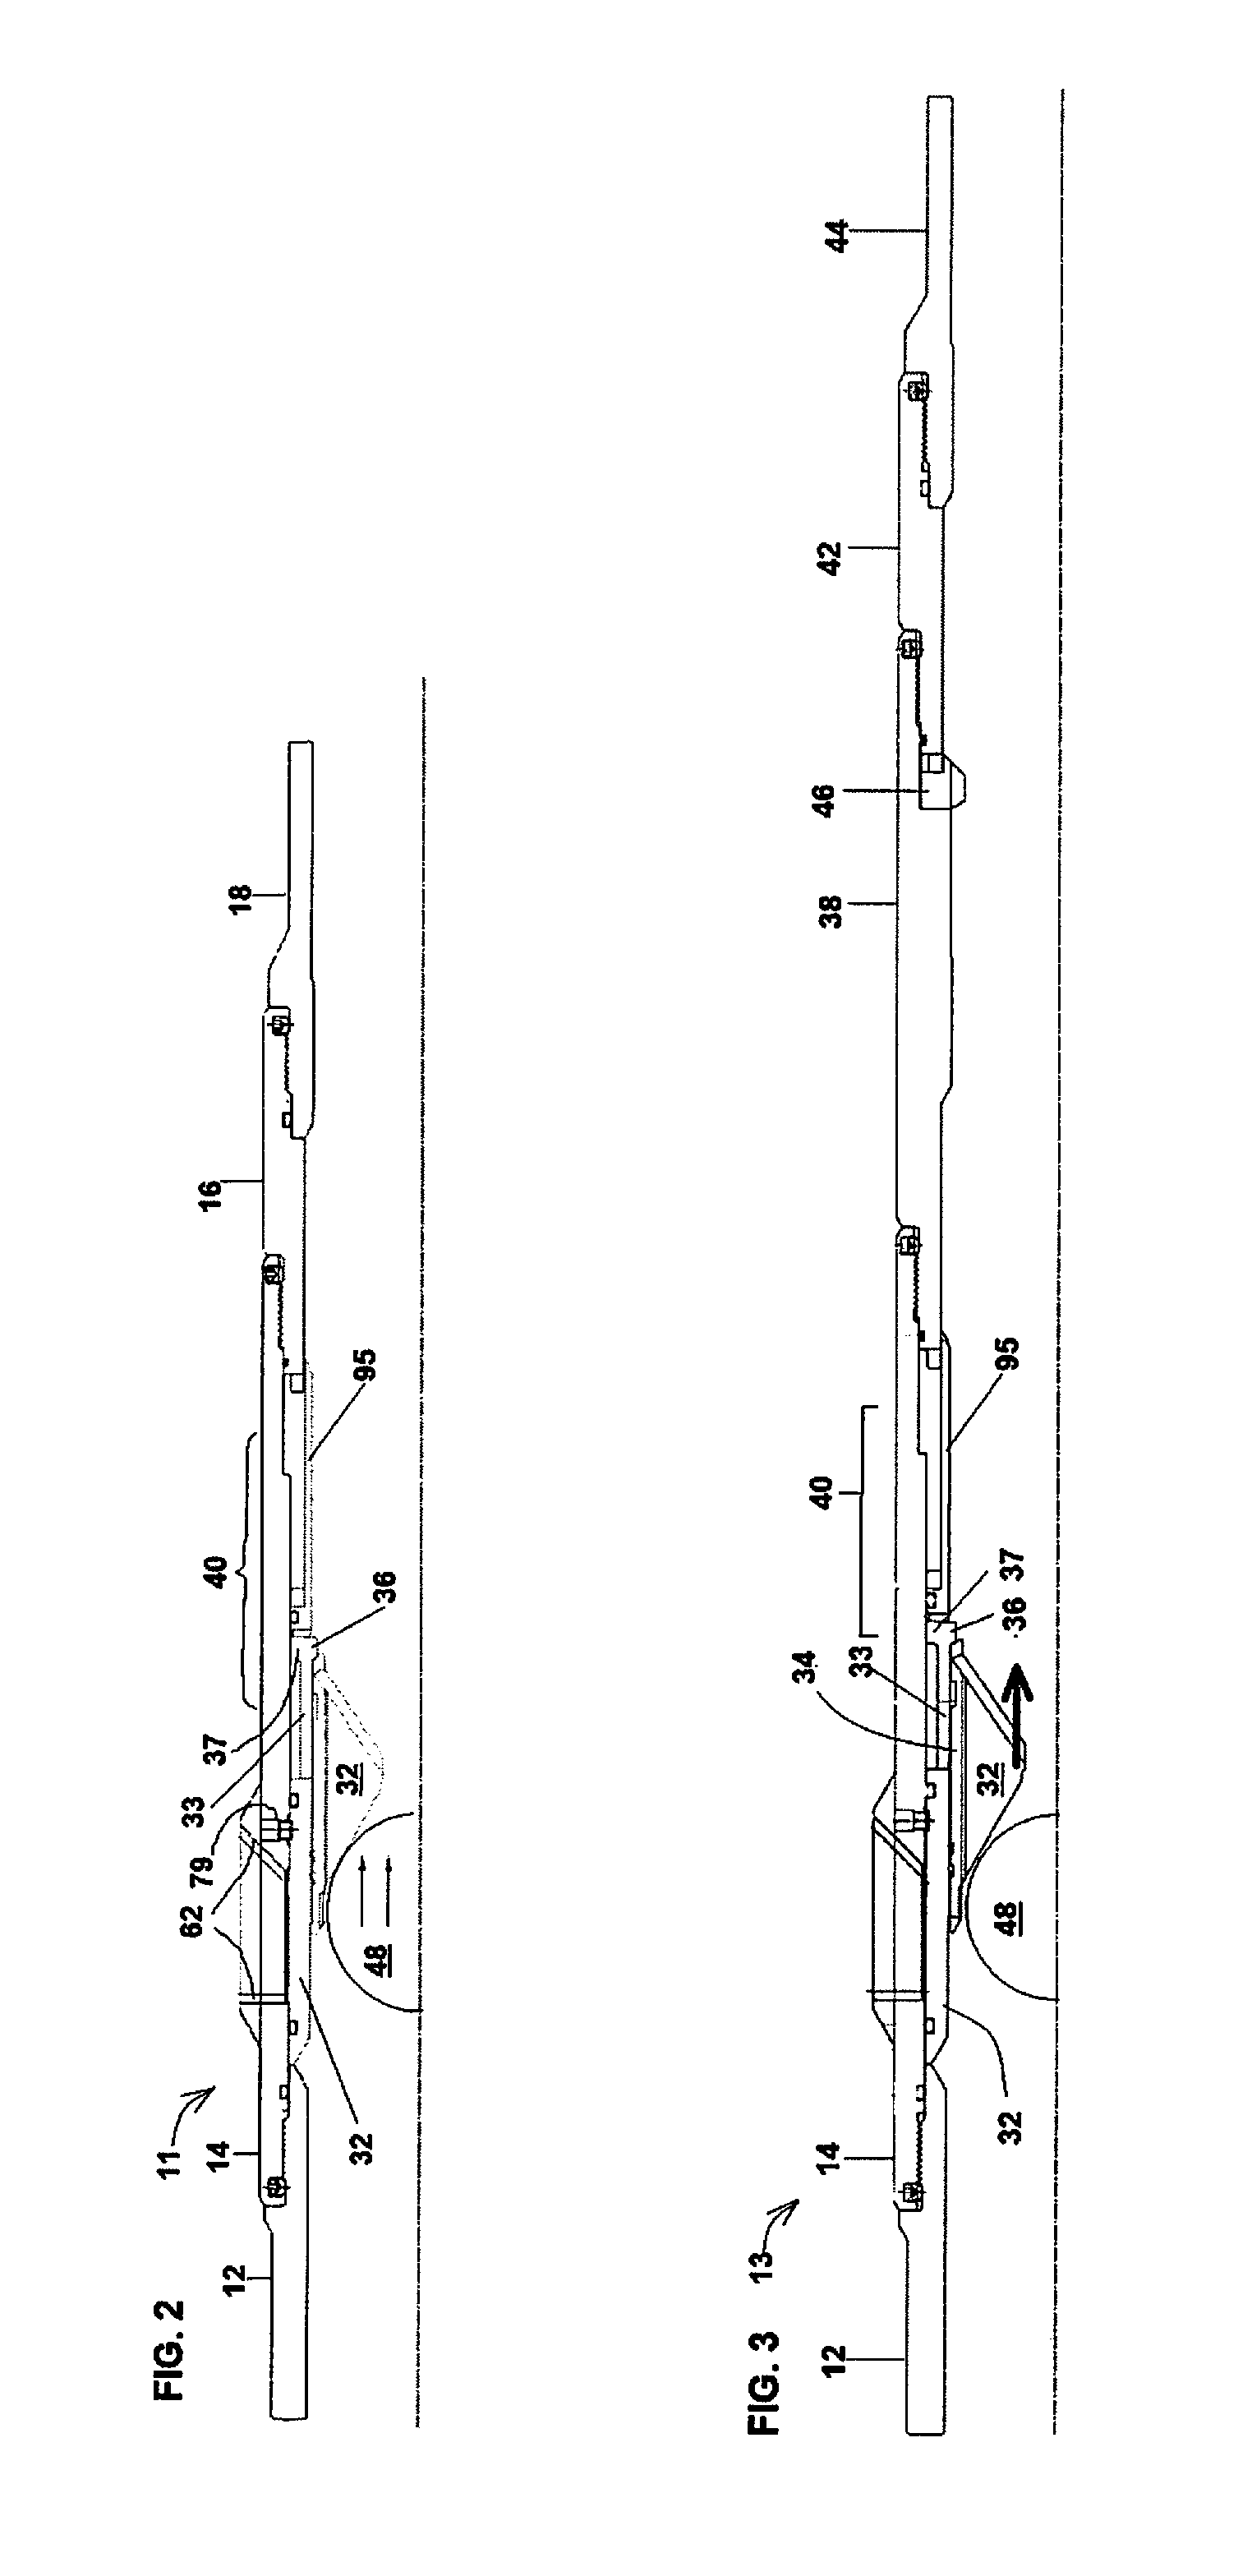 Multi-stage liner with cluster valves and method of use